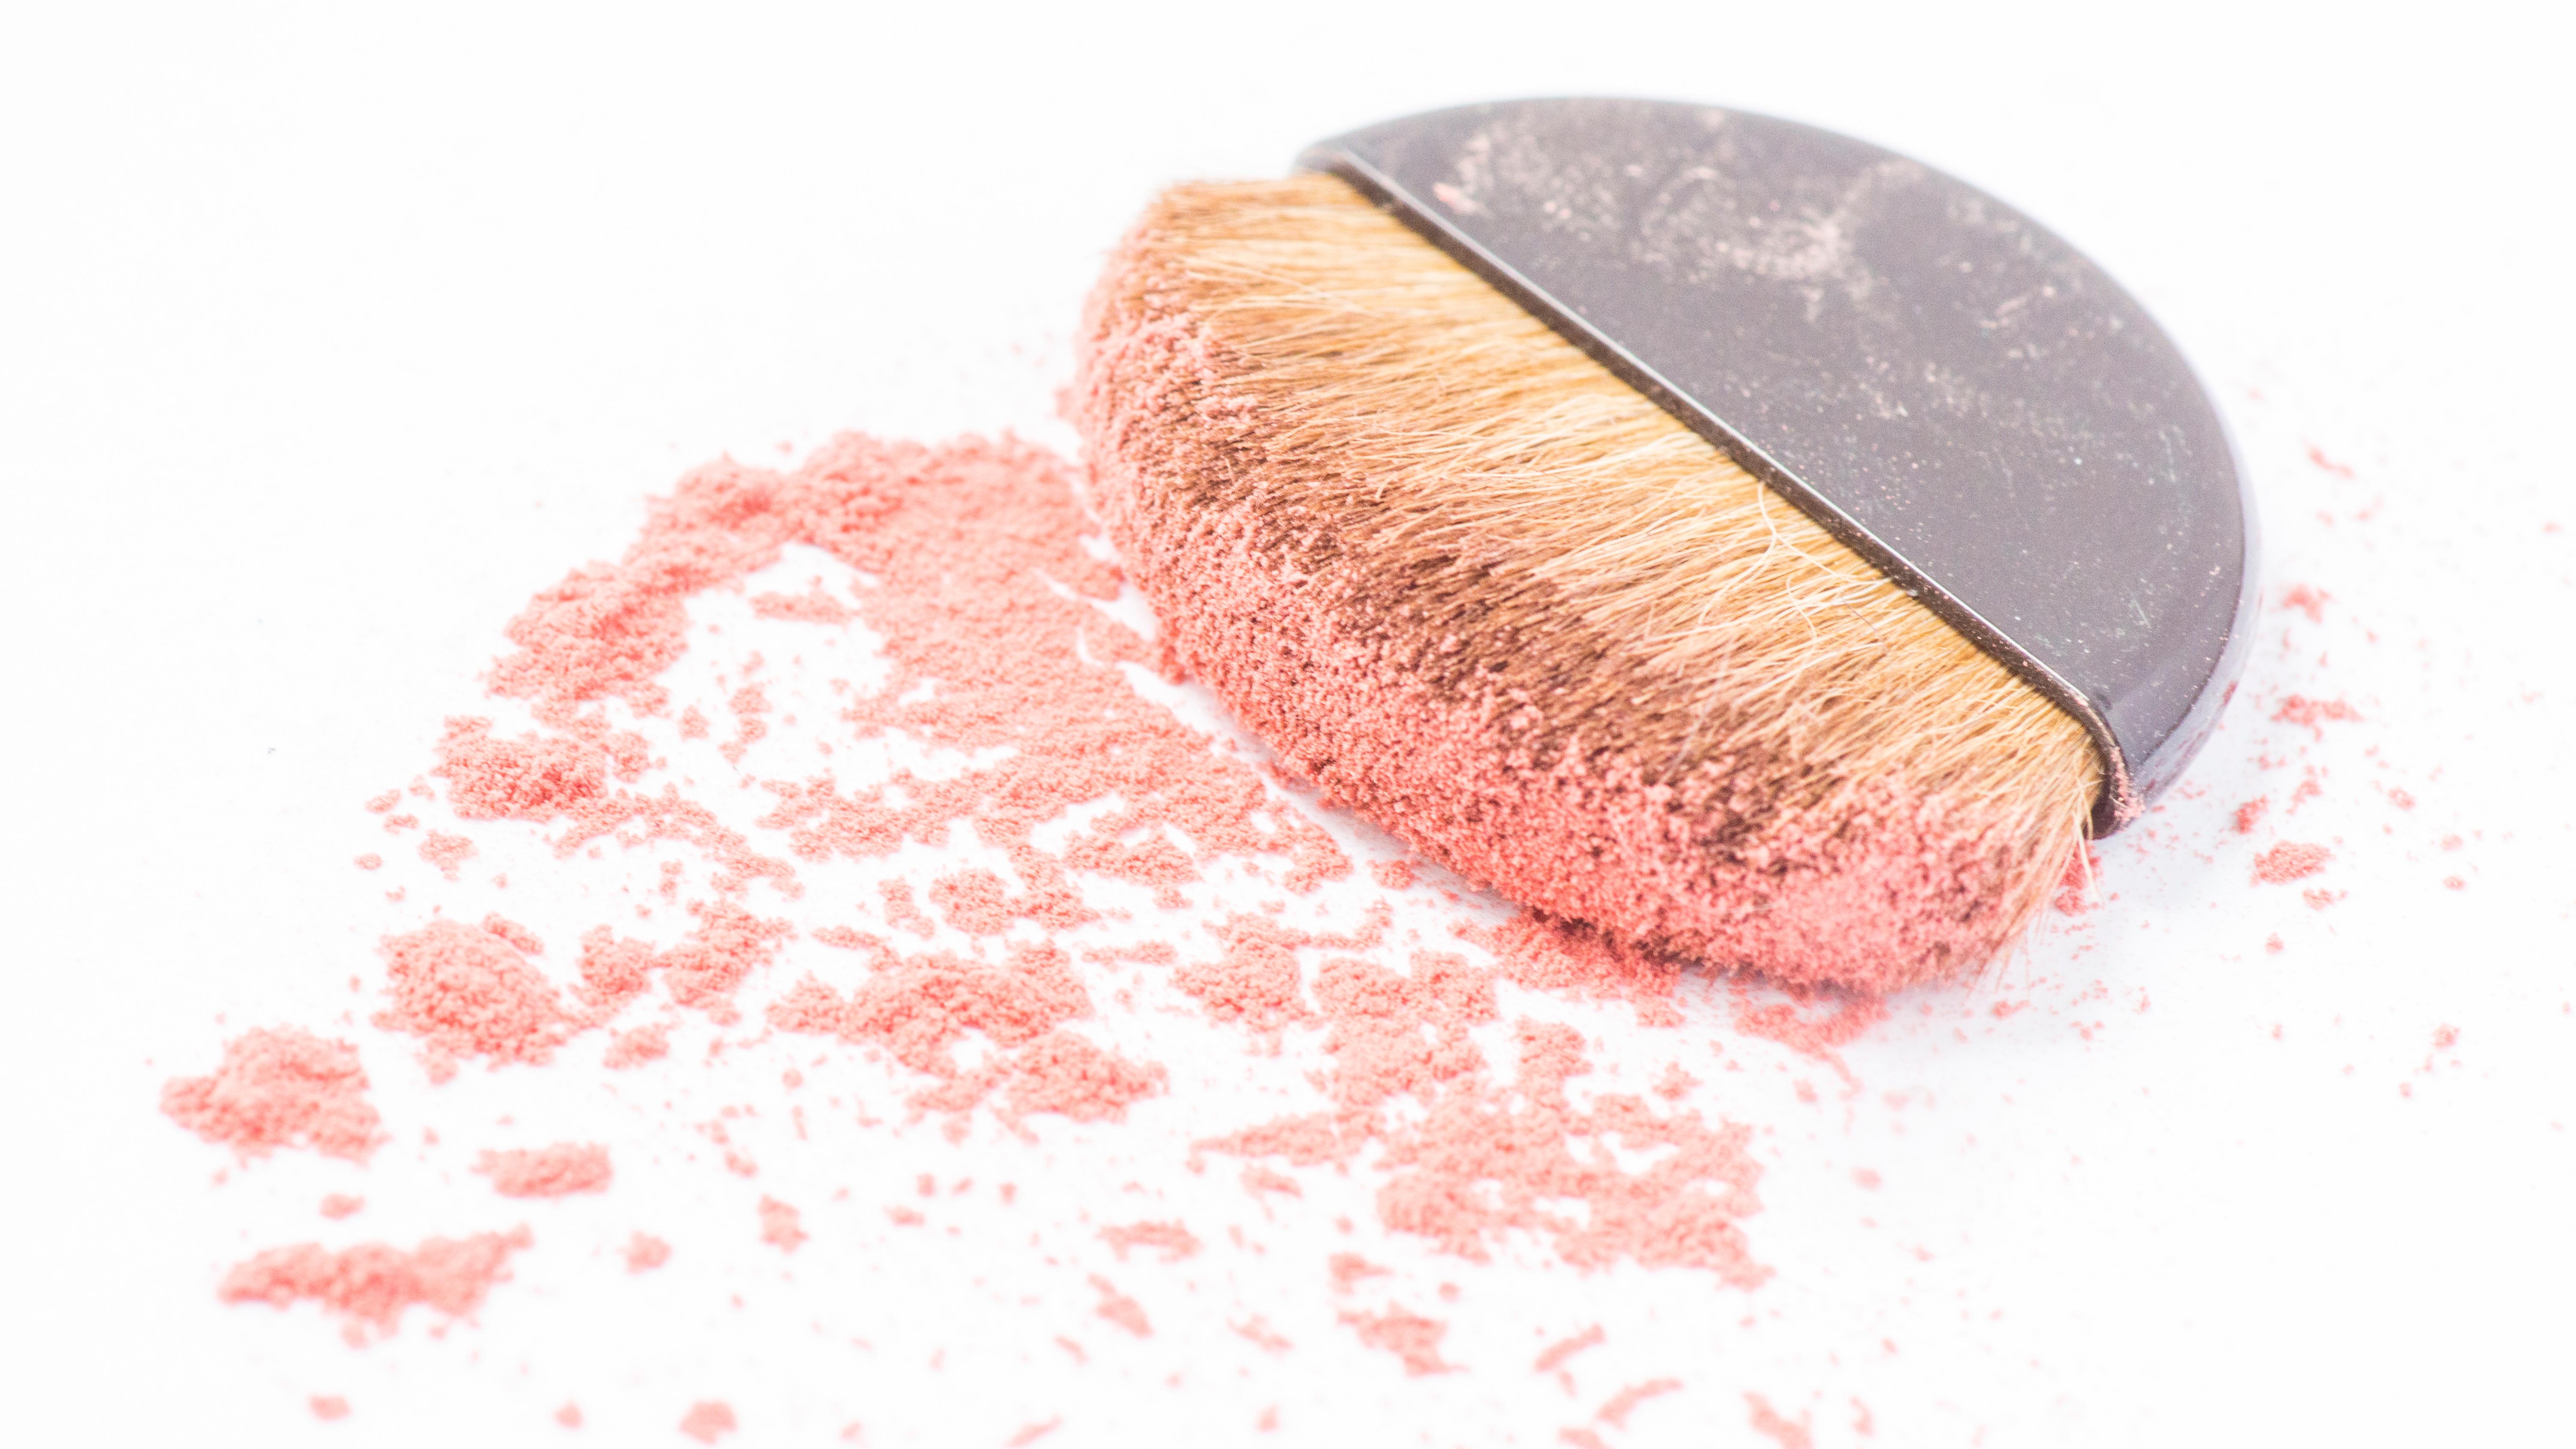 Mica-Free Makeup Plus Cosmetics That Ethically Source Mica